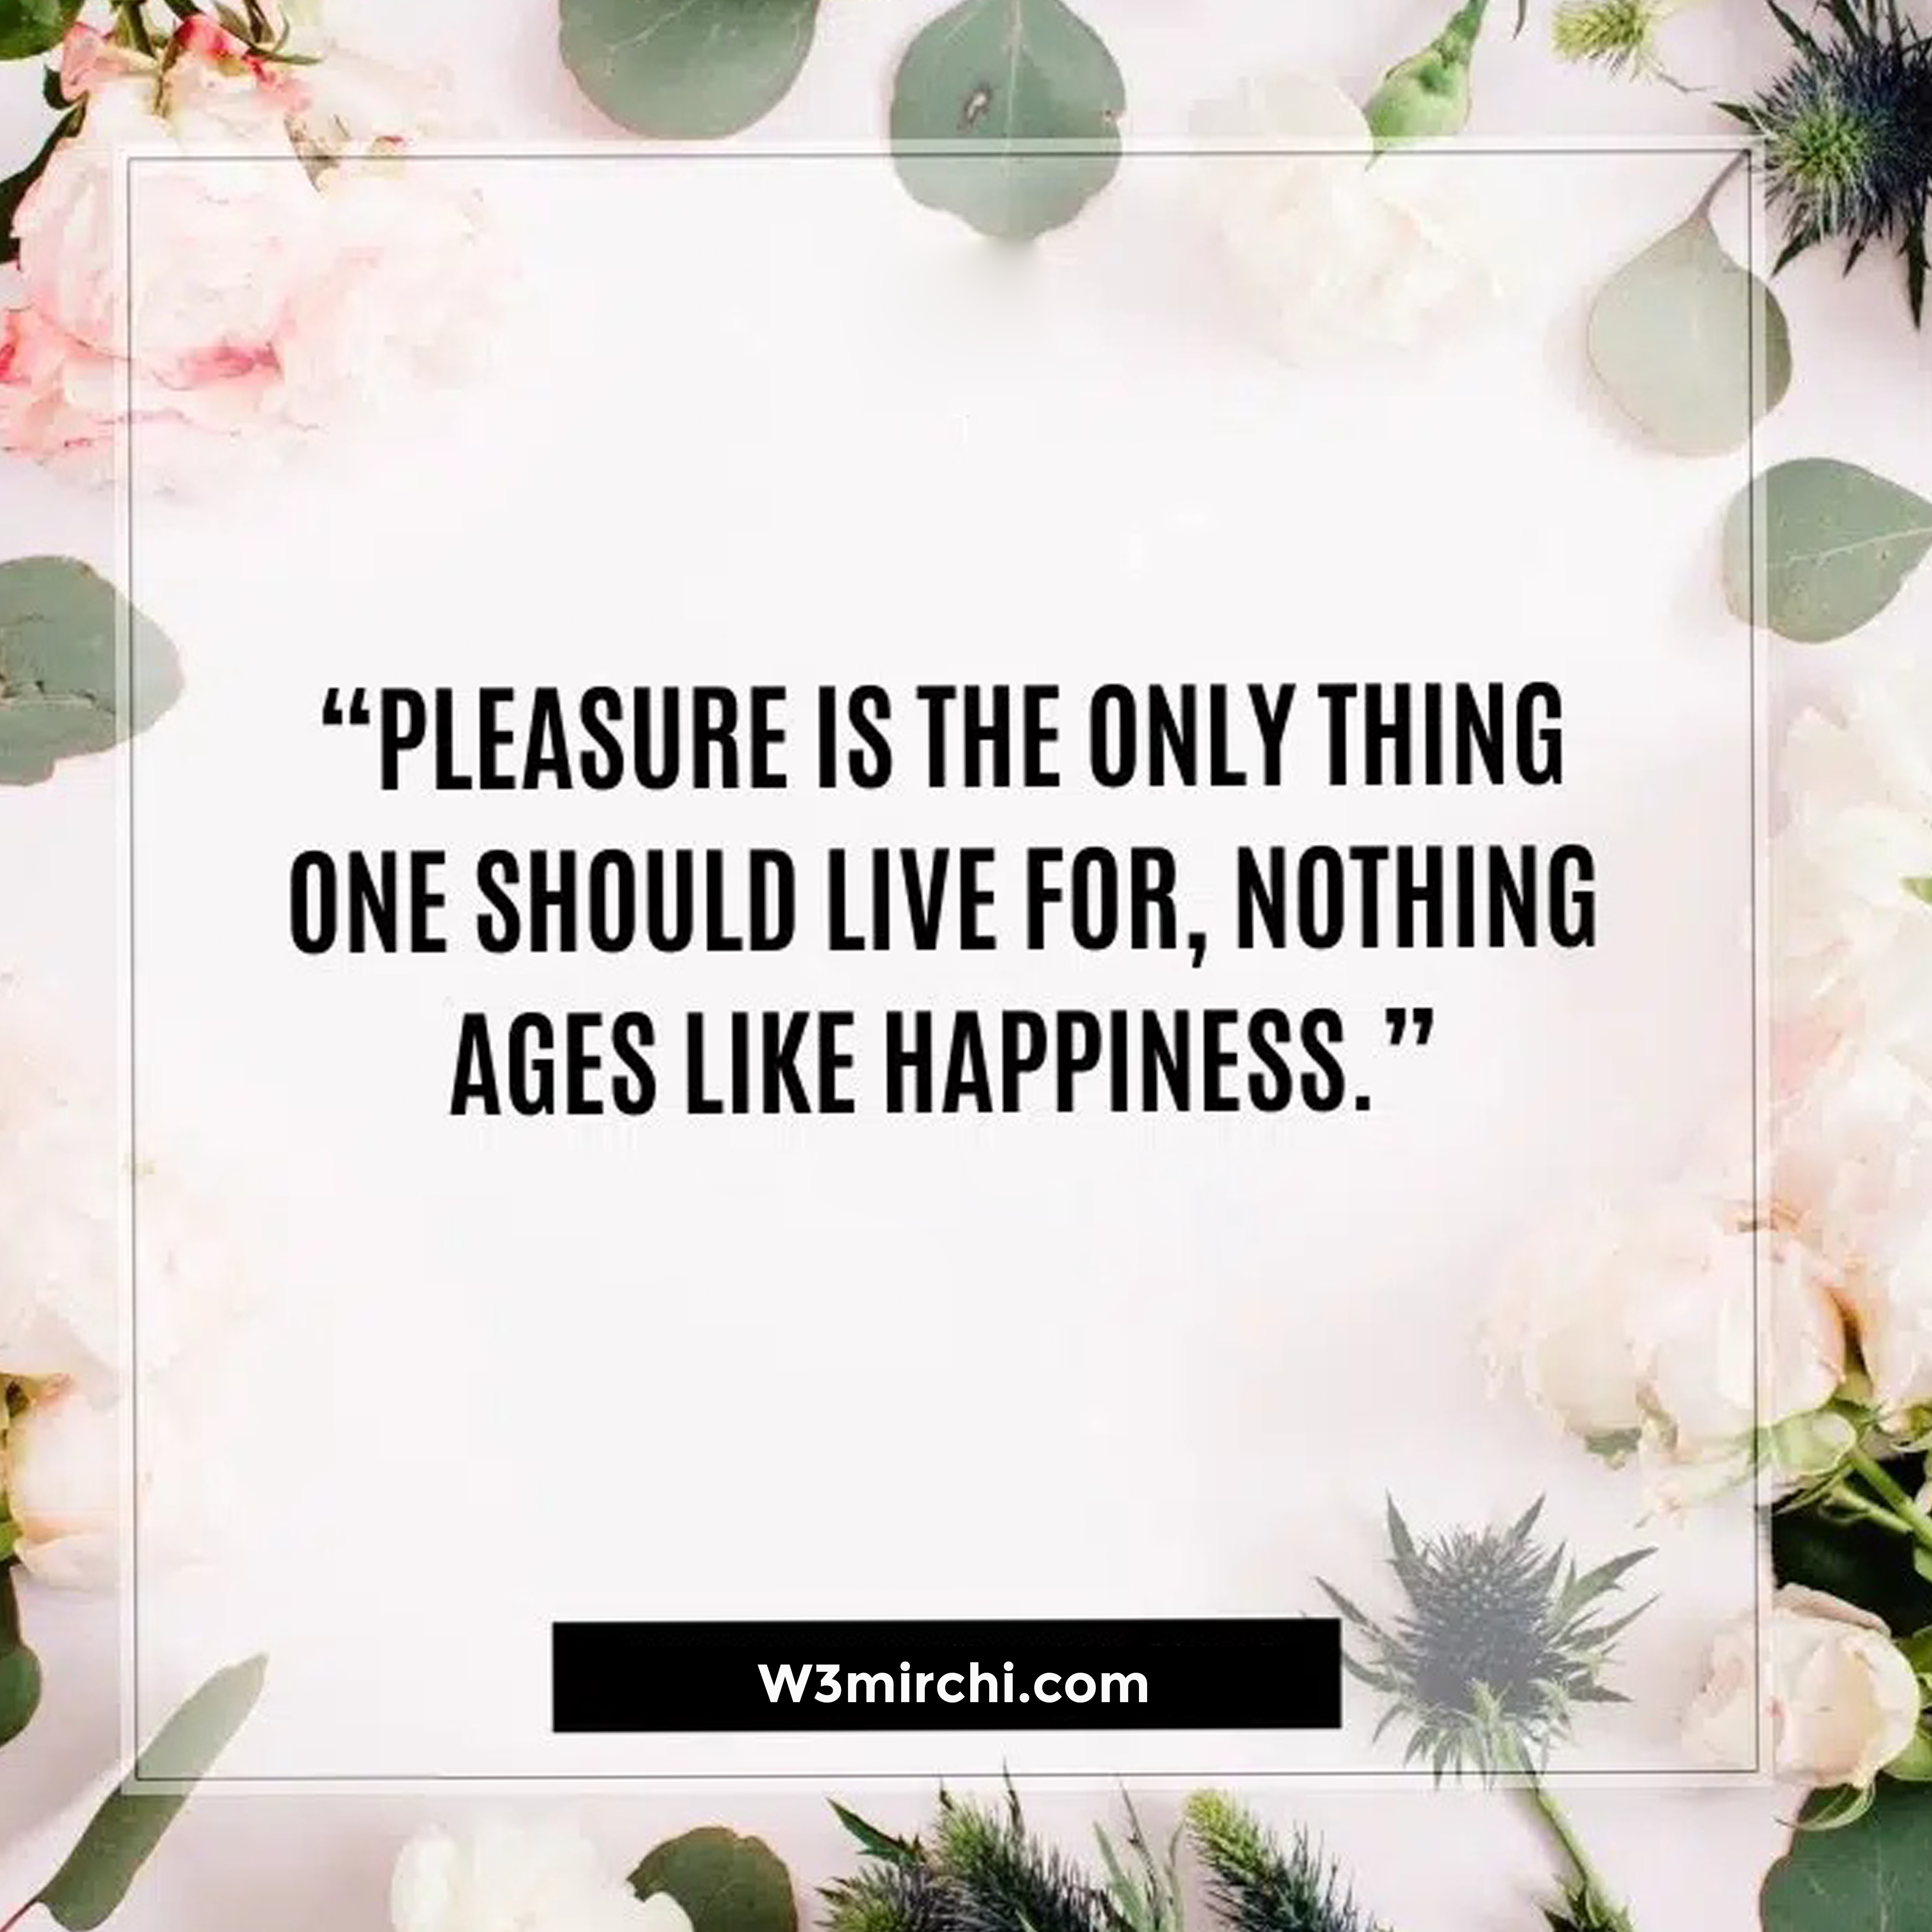 “Pleasure is the only thing one should live